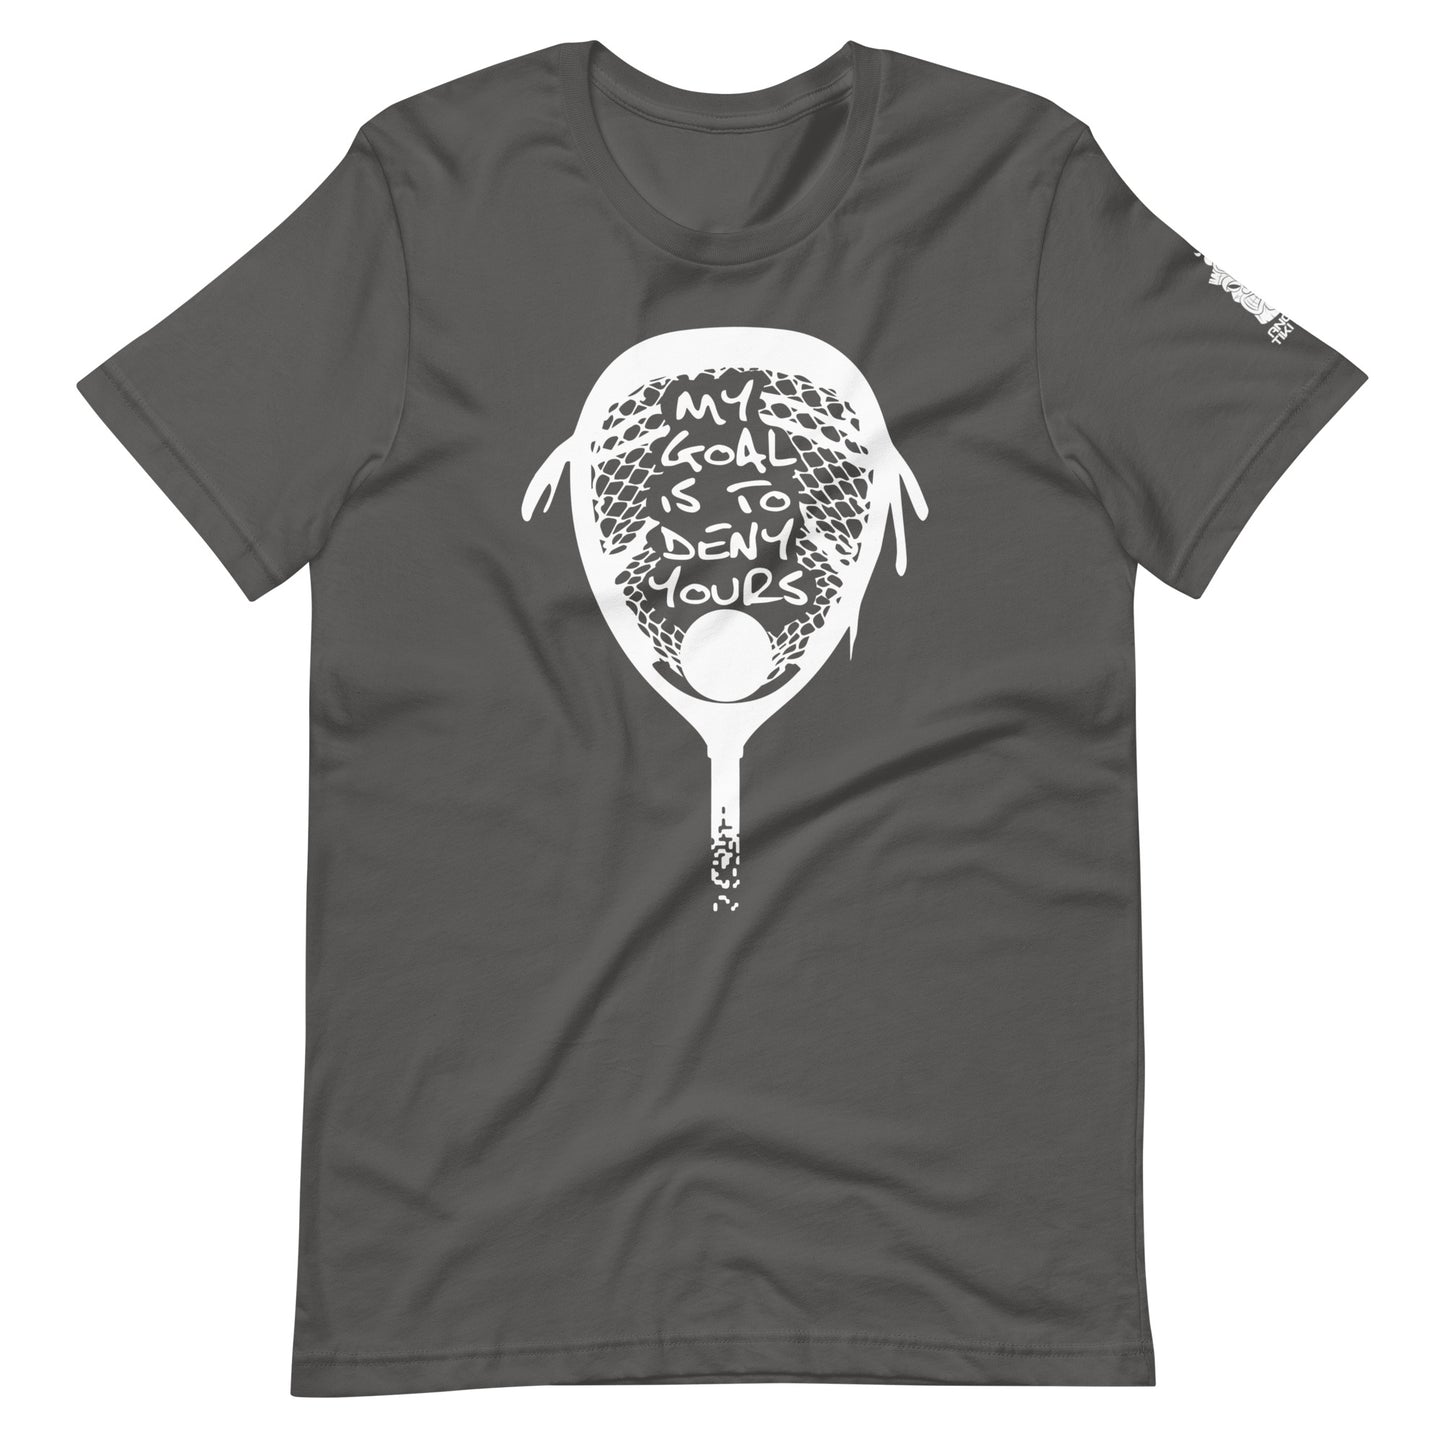 My goal is to deny yours lacrosse Unisex t-shirt